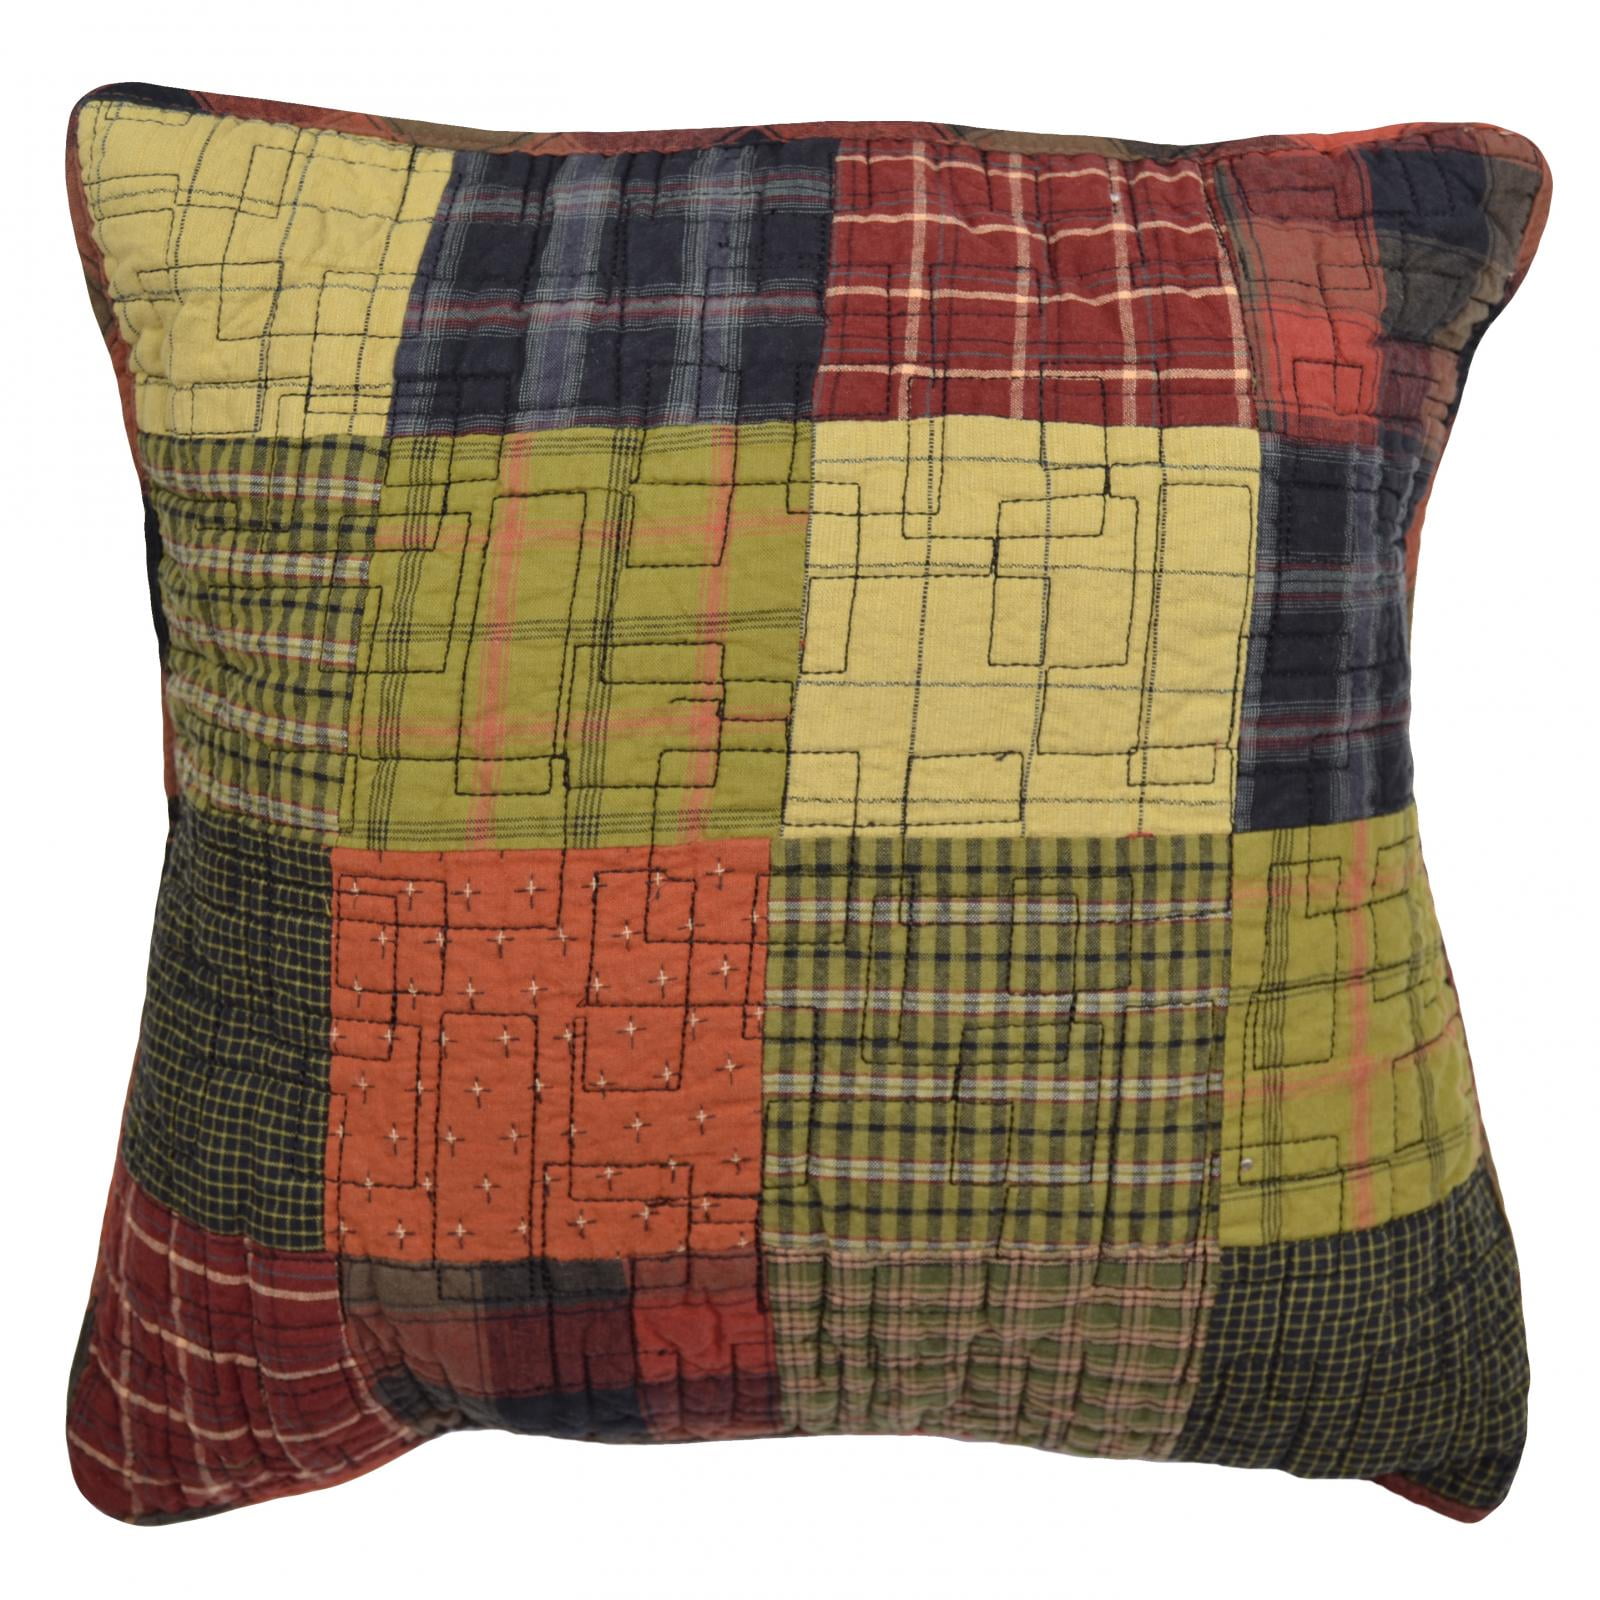 Picture of American Heritage Textiles 24701 15 x 15 in. Woodland Square Decorative Pillow, Multi Color